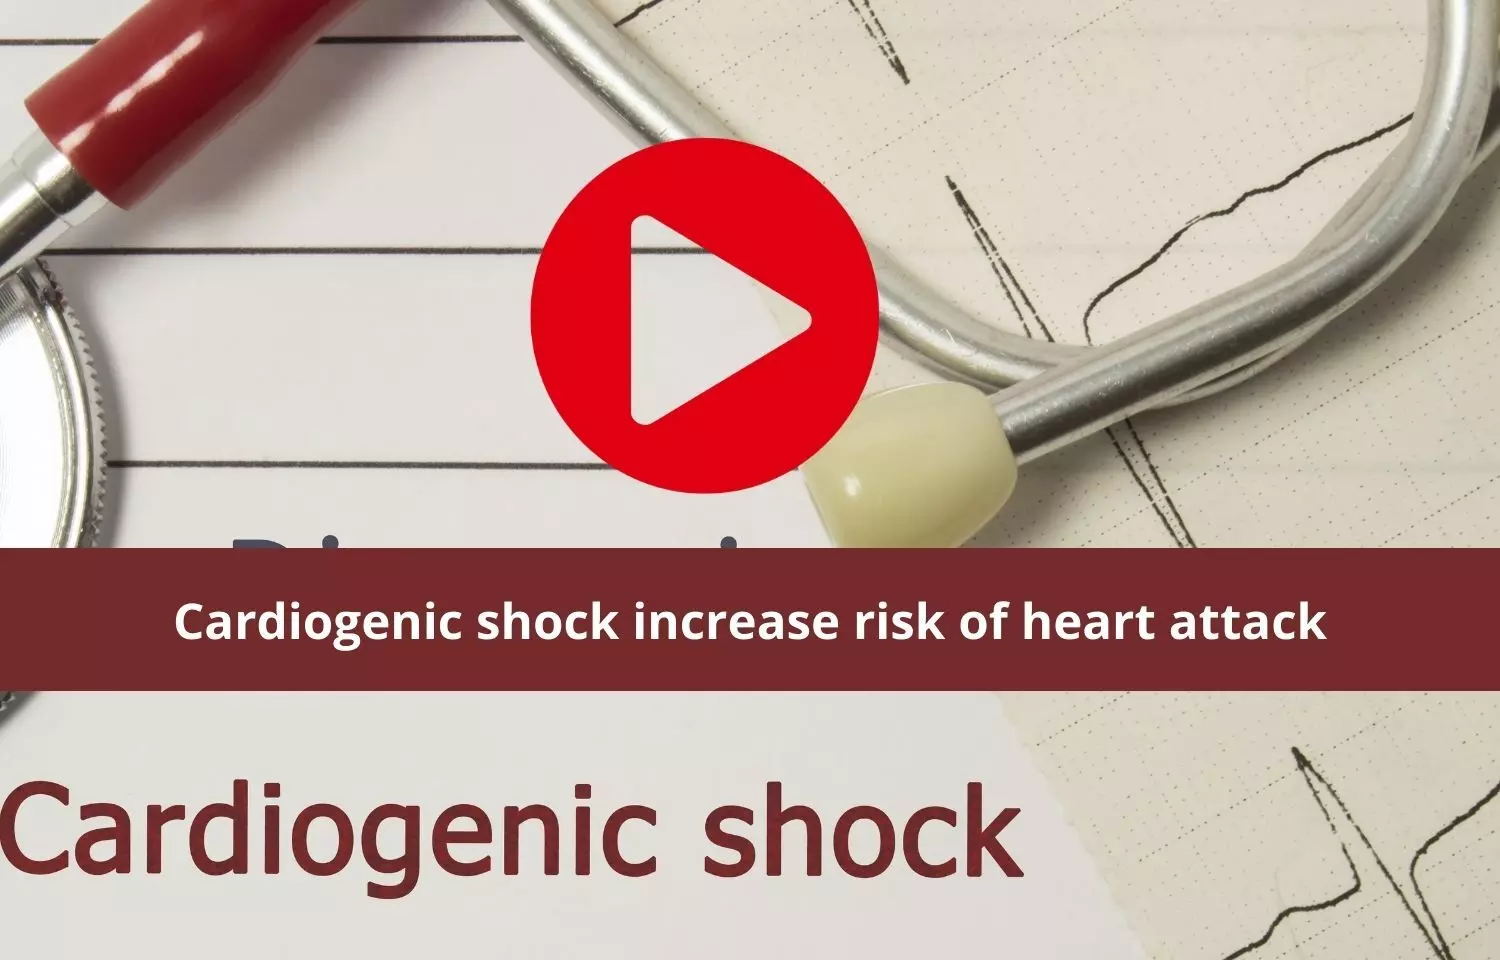 Cardiogenic shock a serious risk of heart attack